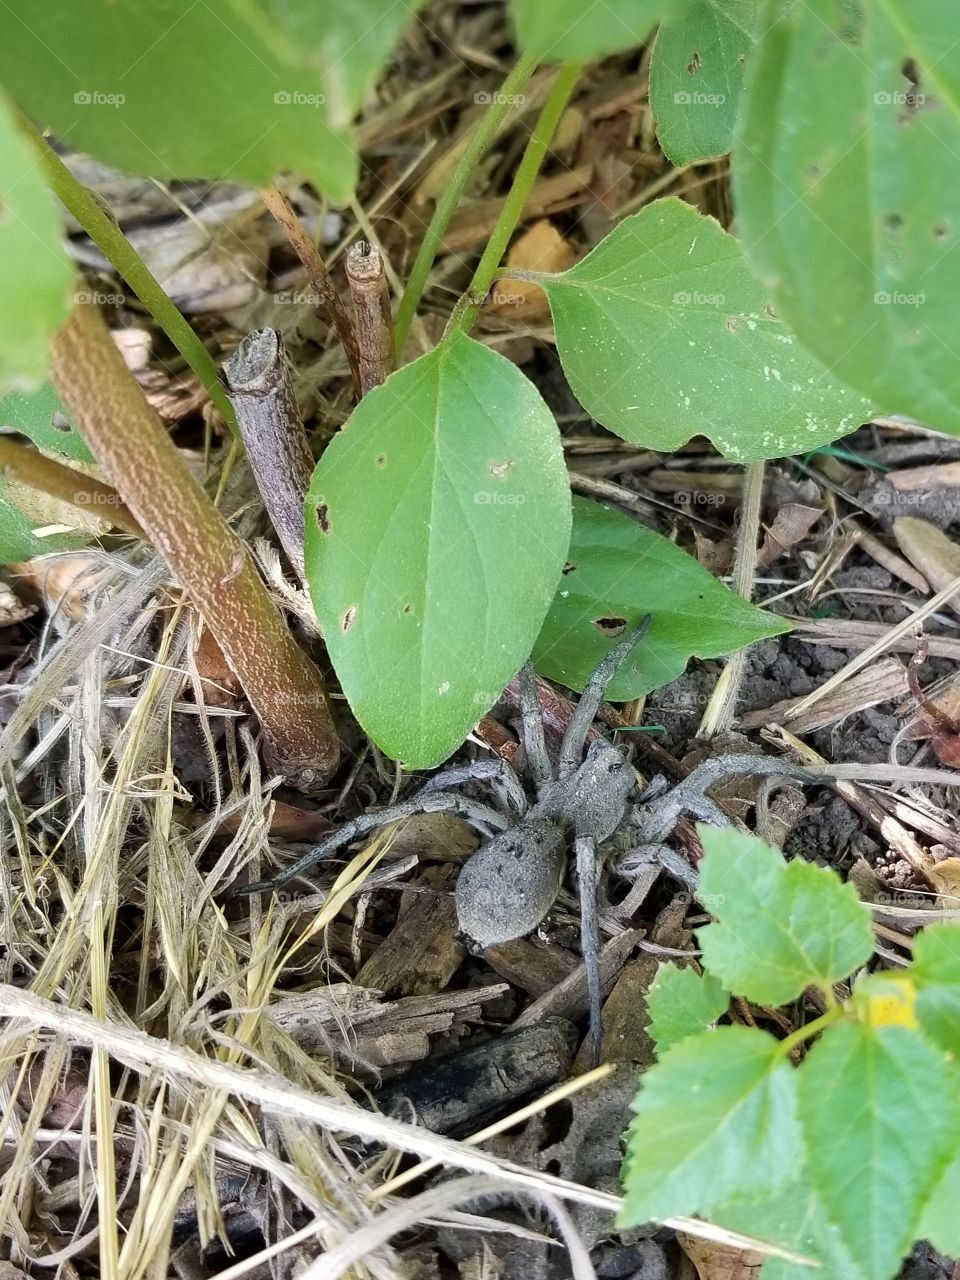 A large spider in my Kansas back yard.